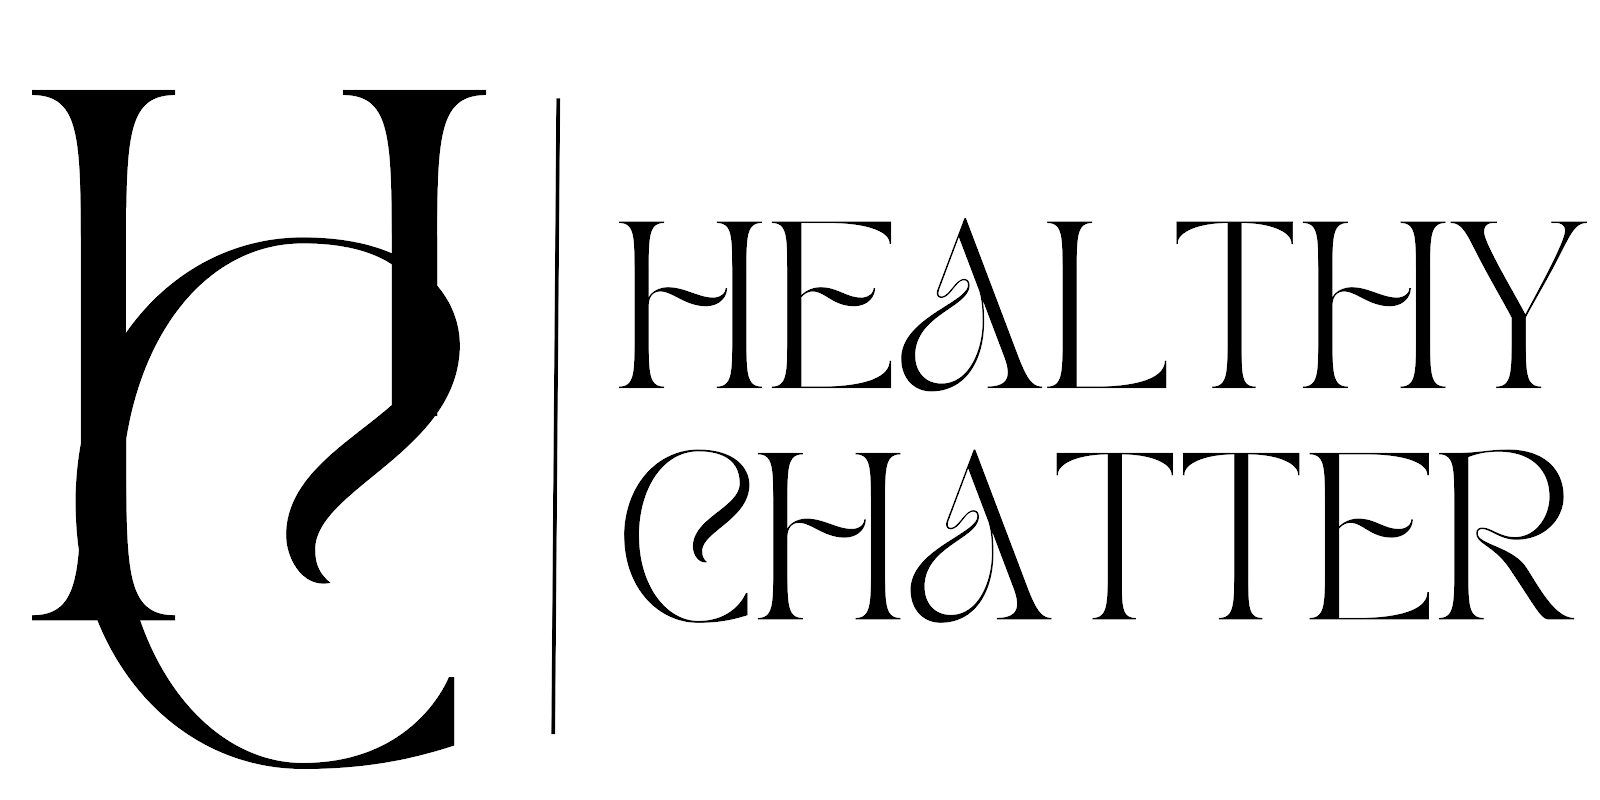 The Healthy Chatter | Health | Fitness | Meditation | Mental Health | Spirituality